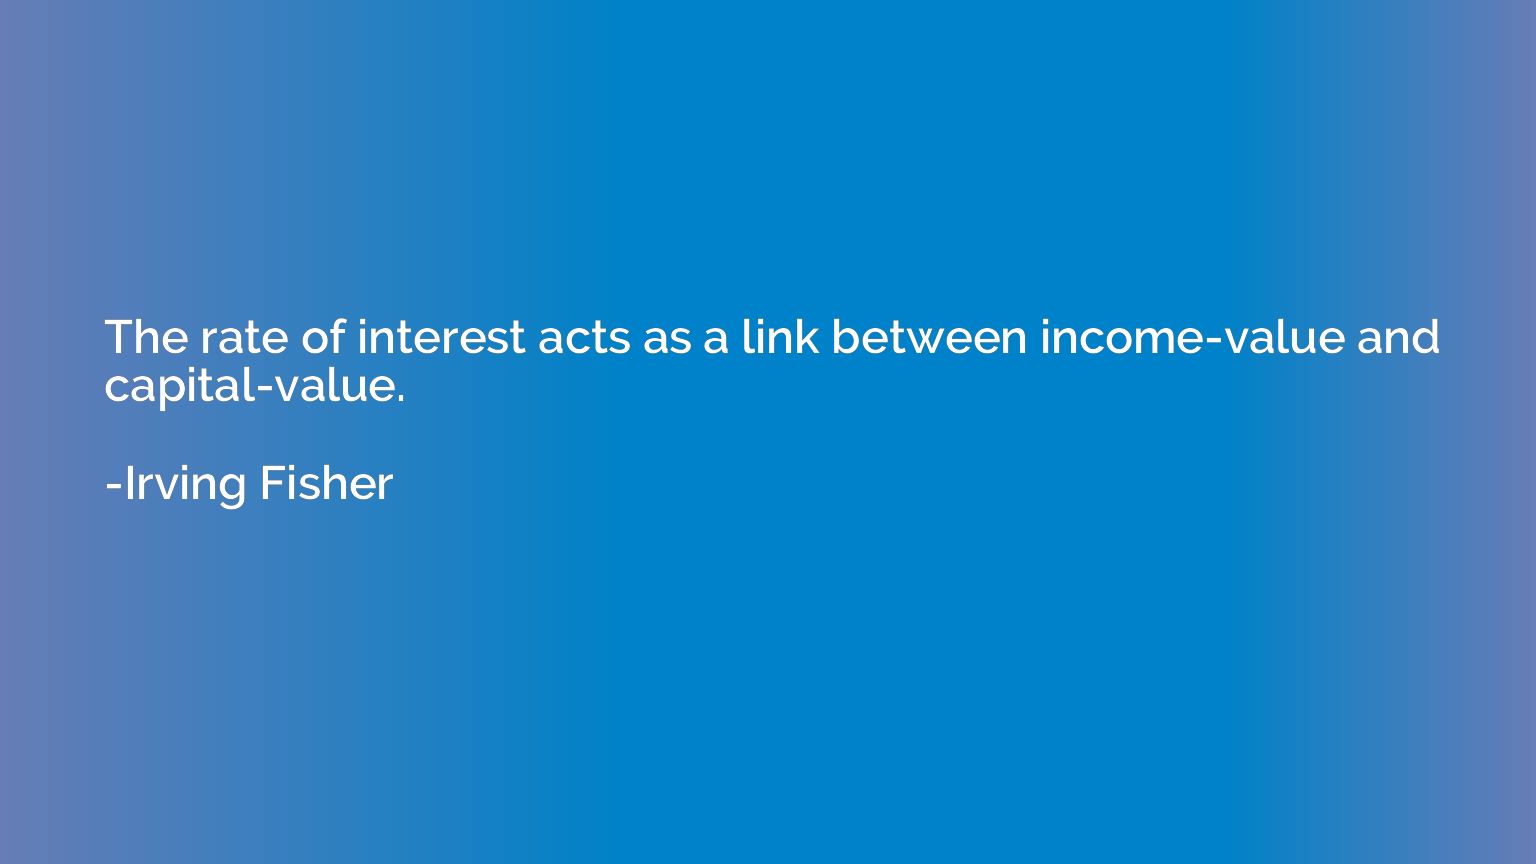 The rate of interest acts as a link between income-value and